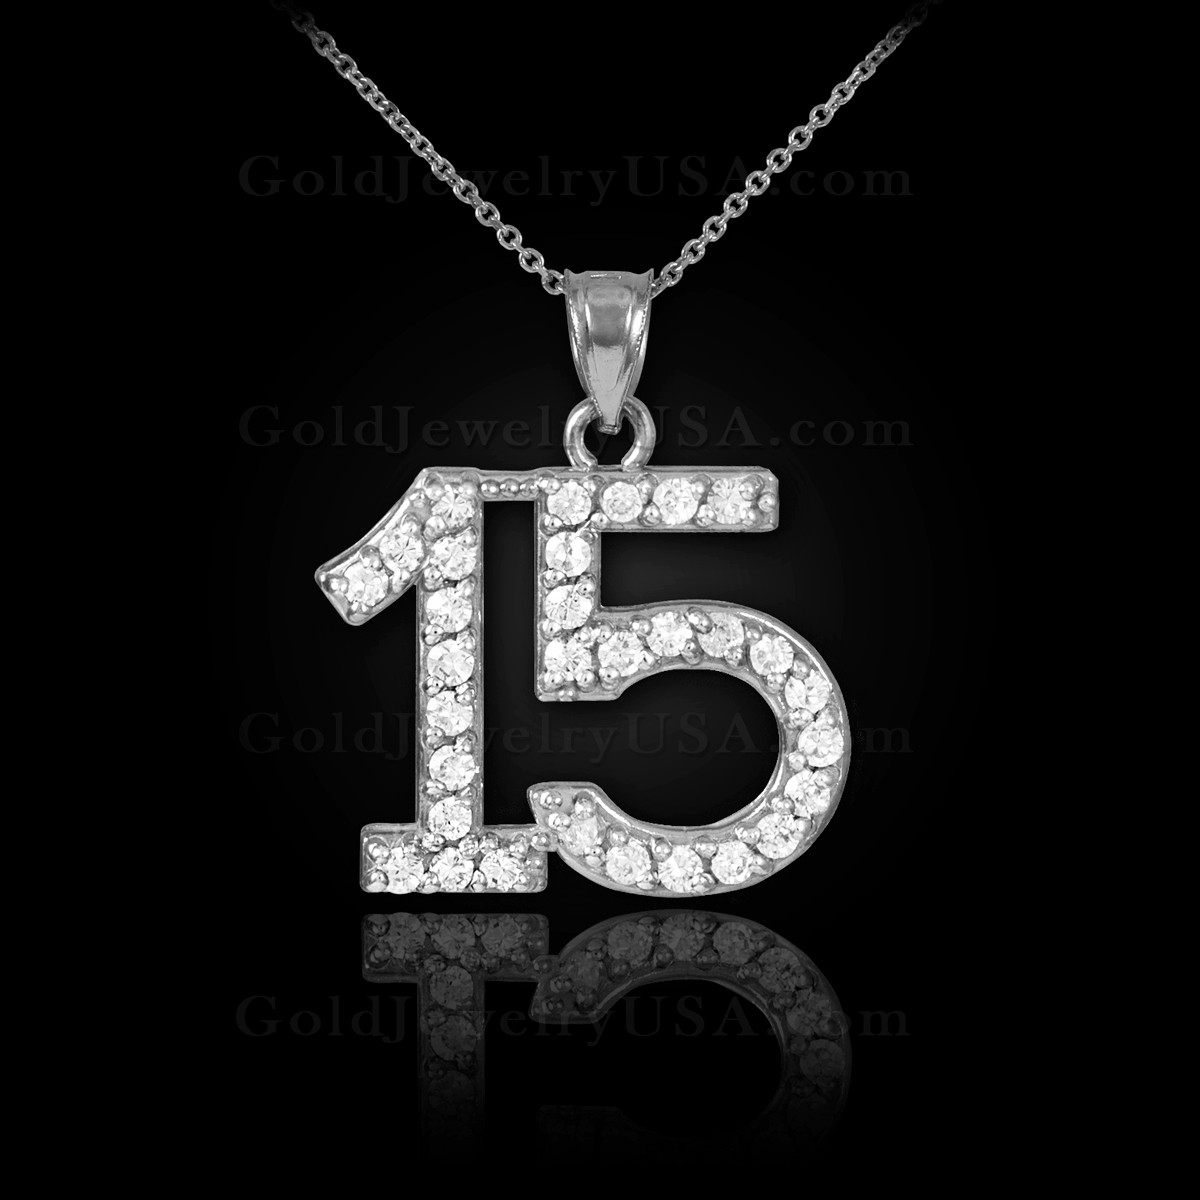 Floating Quinceanera 15 Anos Milgrain Heart Necklace in 14K Two-Tone Gold |  GoldenMine.com